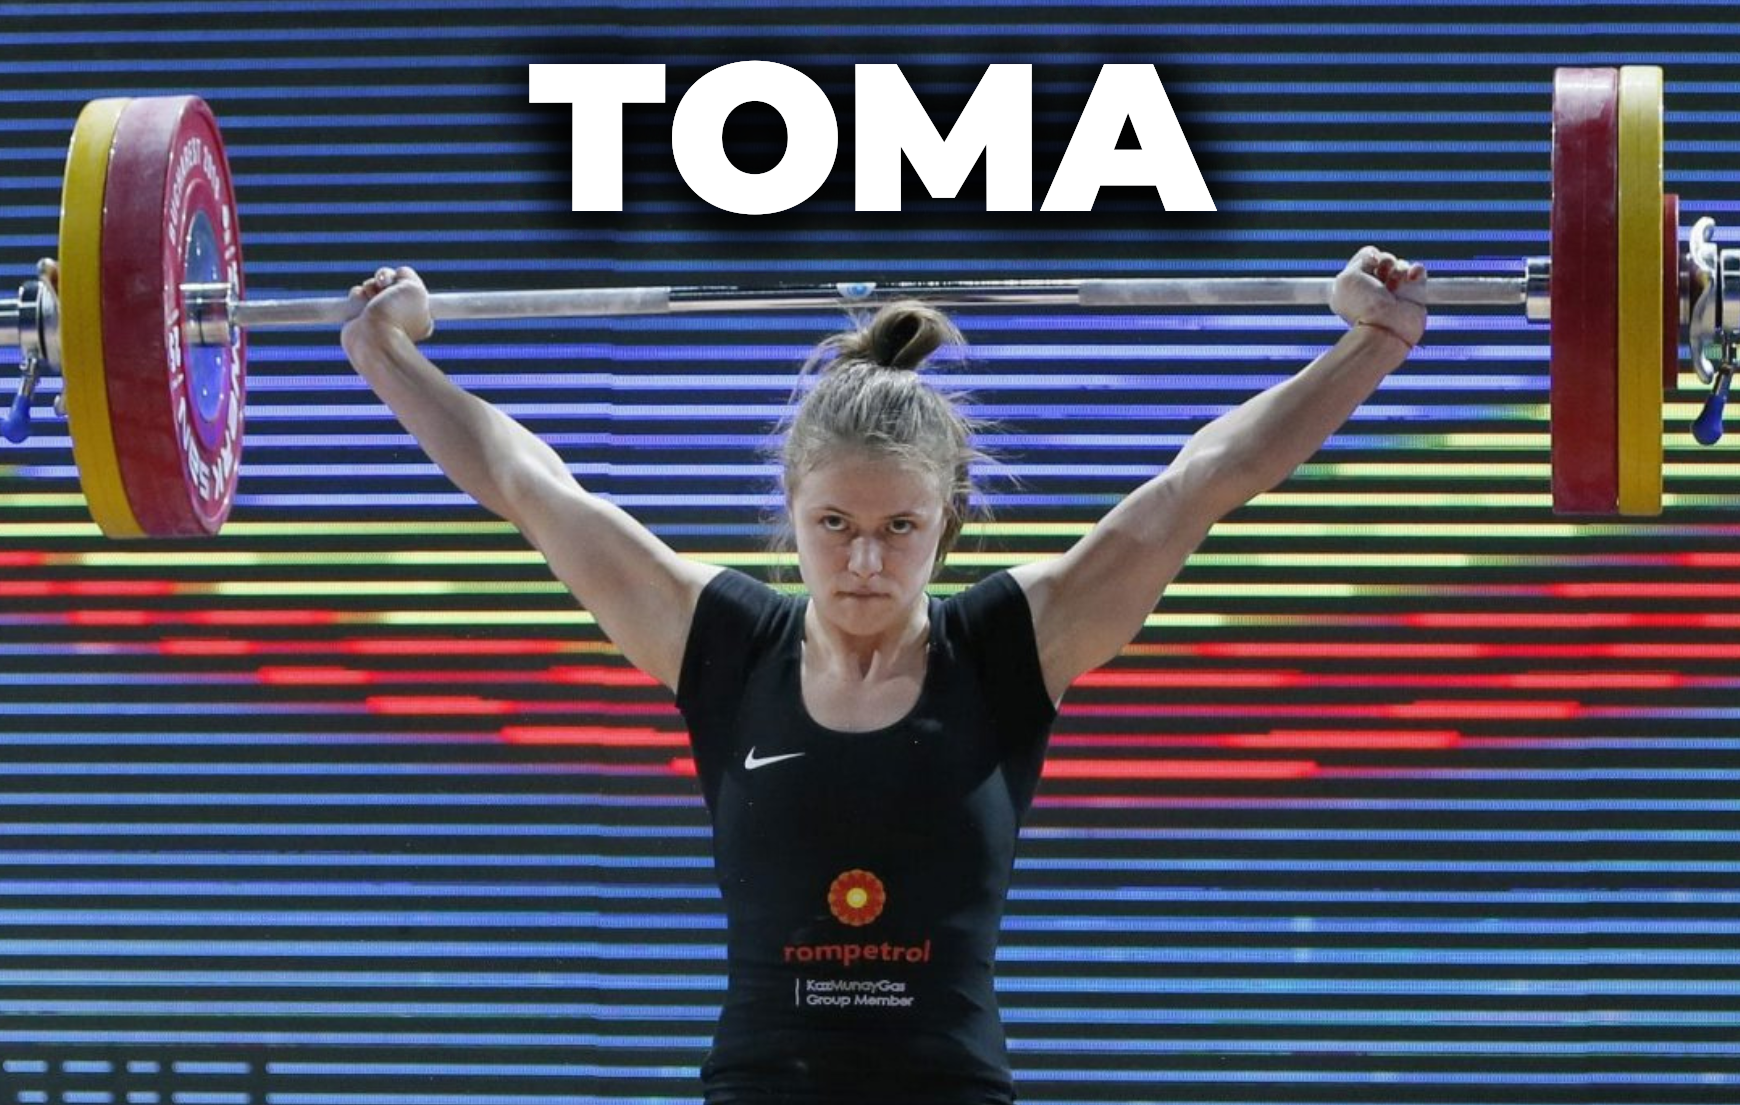 5 Interesting Facts About Romanian Weightlifter Loredana Toma